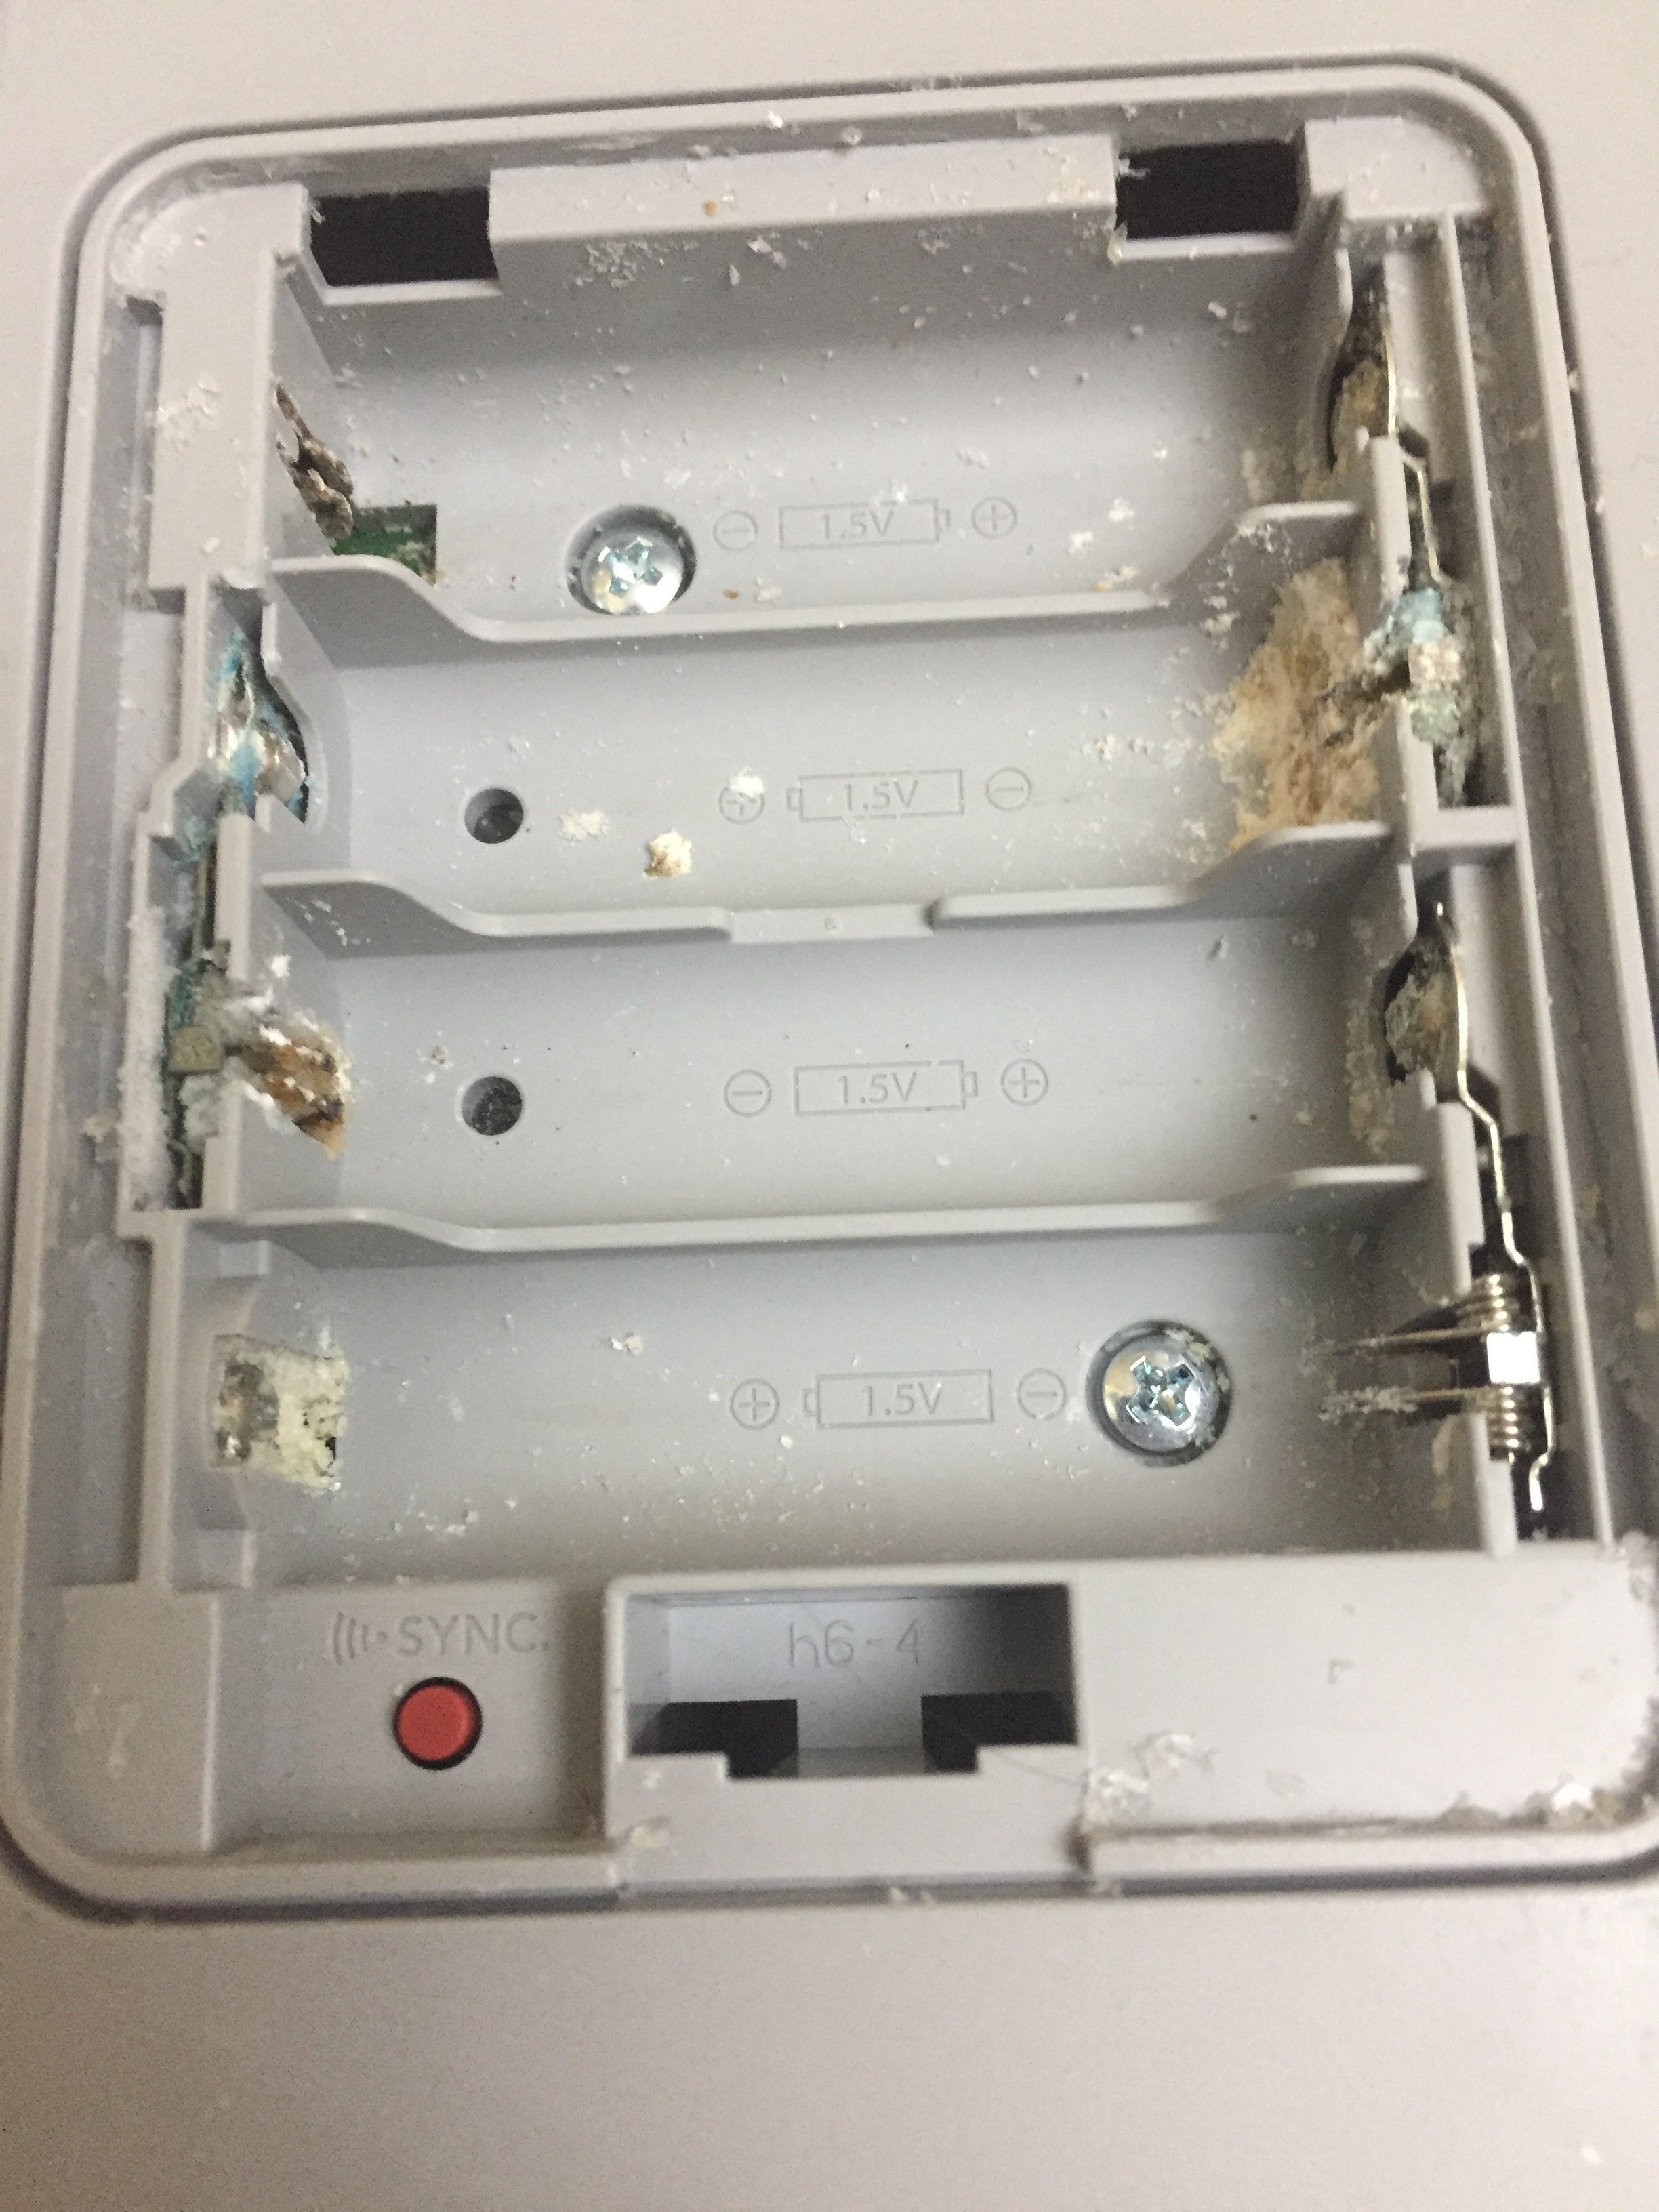 Corroded Wii Fit board, can it saved? | GBAtemp.net - The Independent Video Game Community